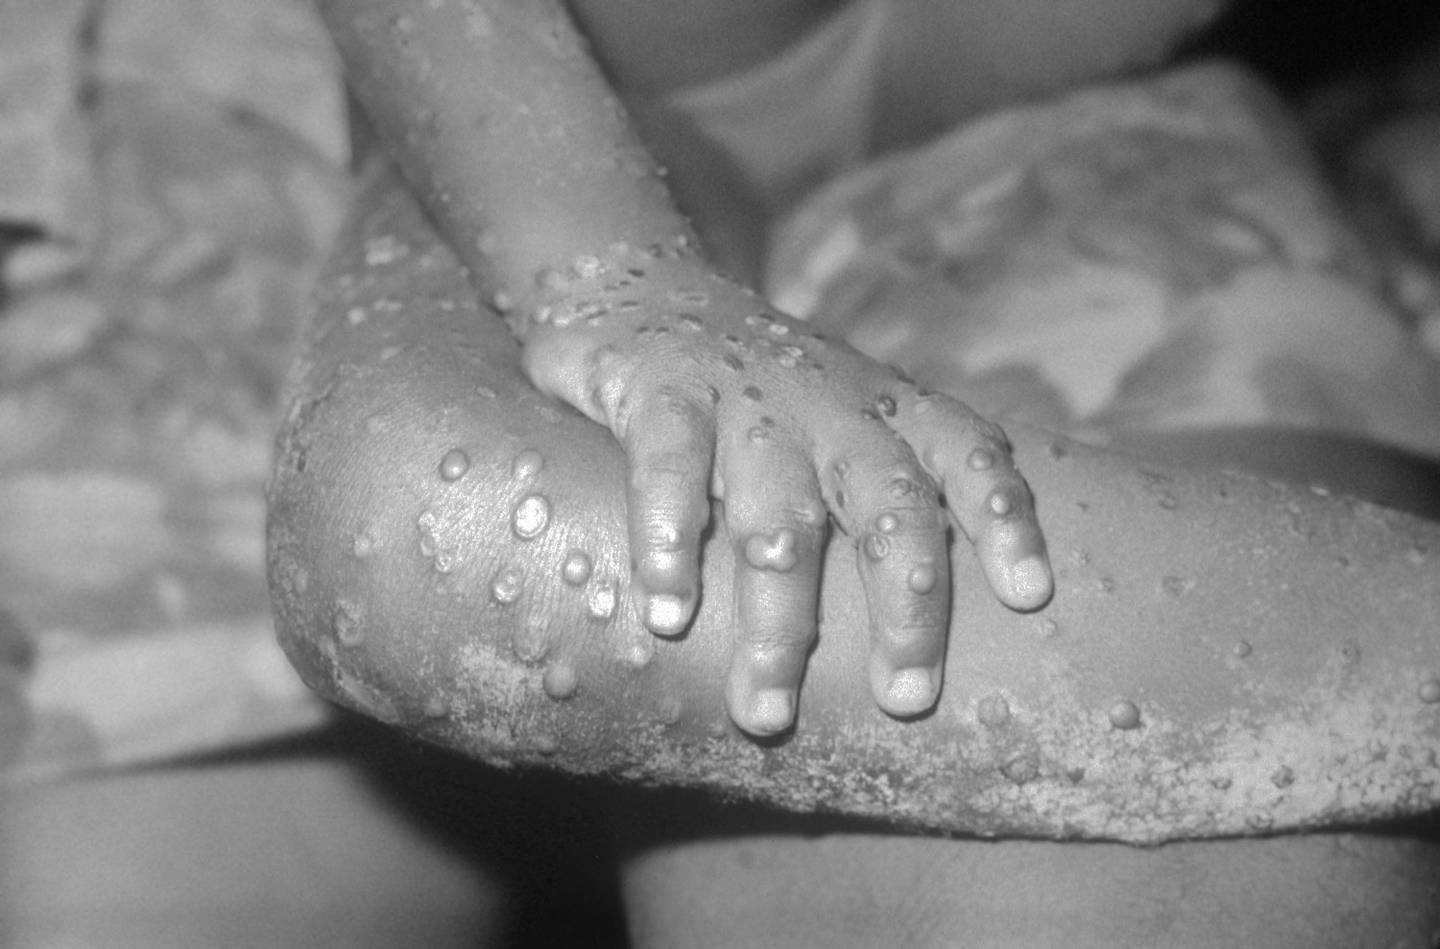 Monkeypox-like lesions are shown on the arm and leg of a female child. Photographer: Photo Courtesy of the CDC//Getty Images